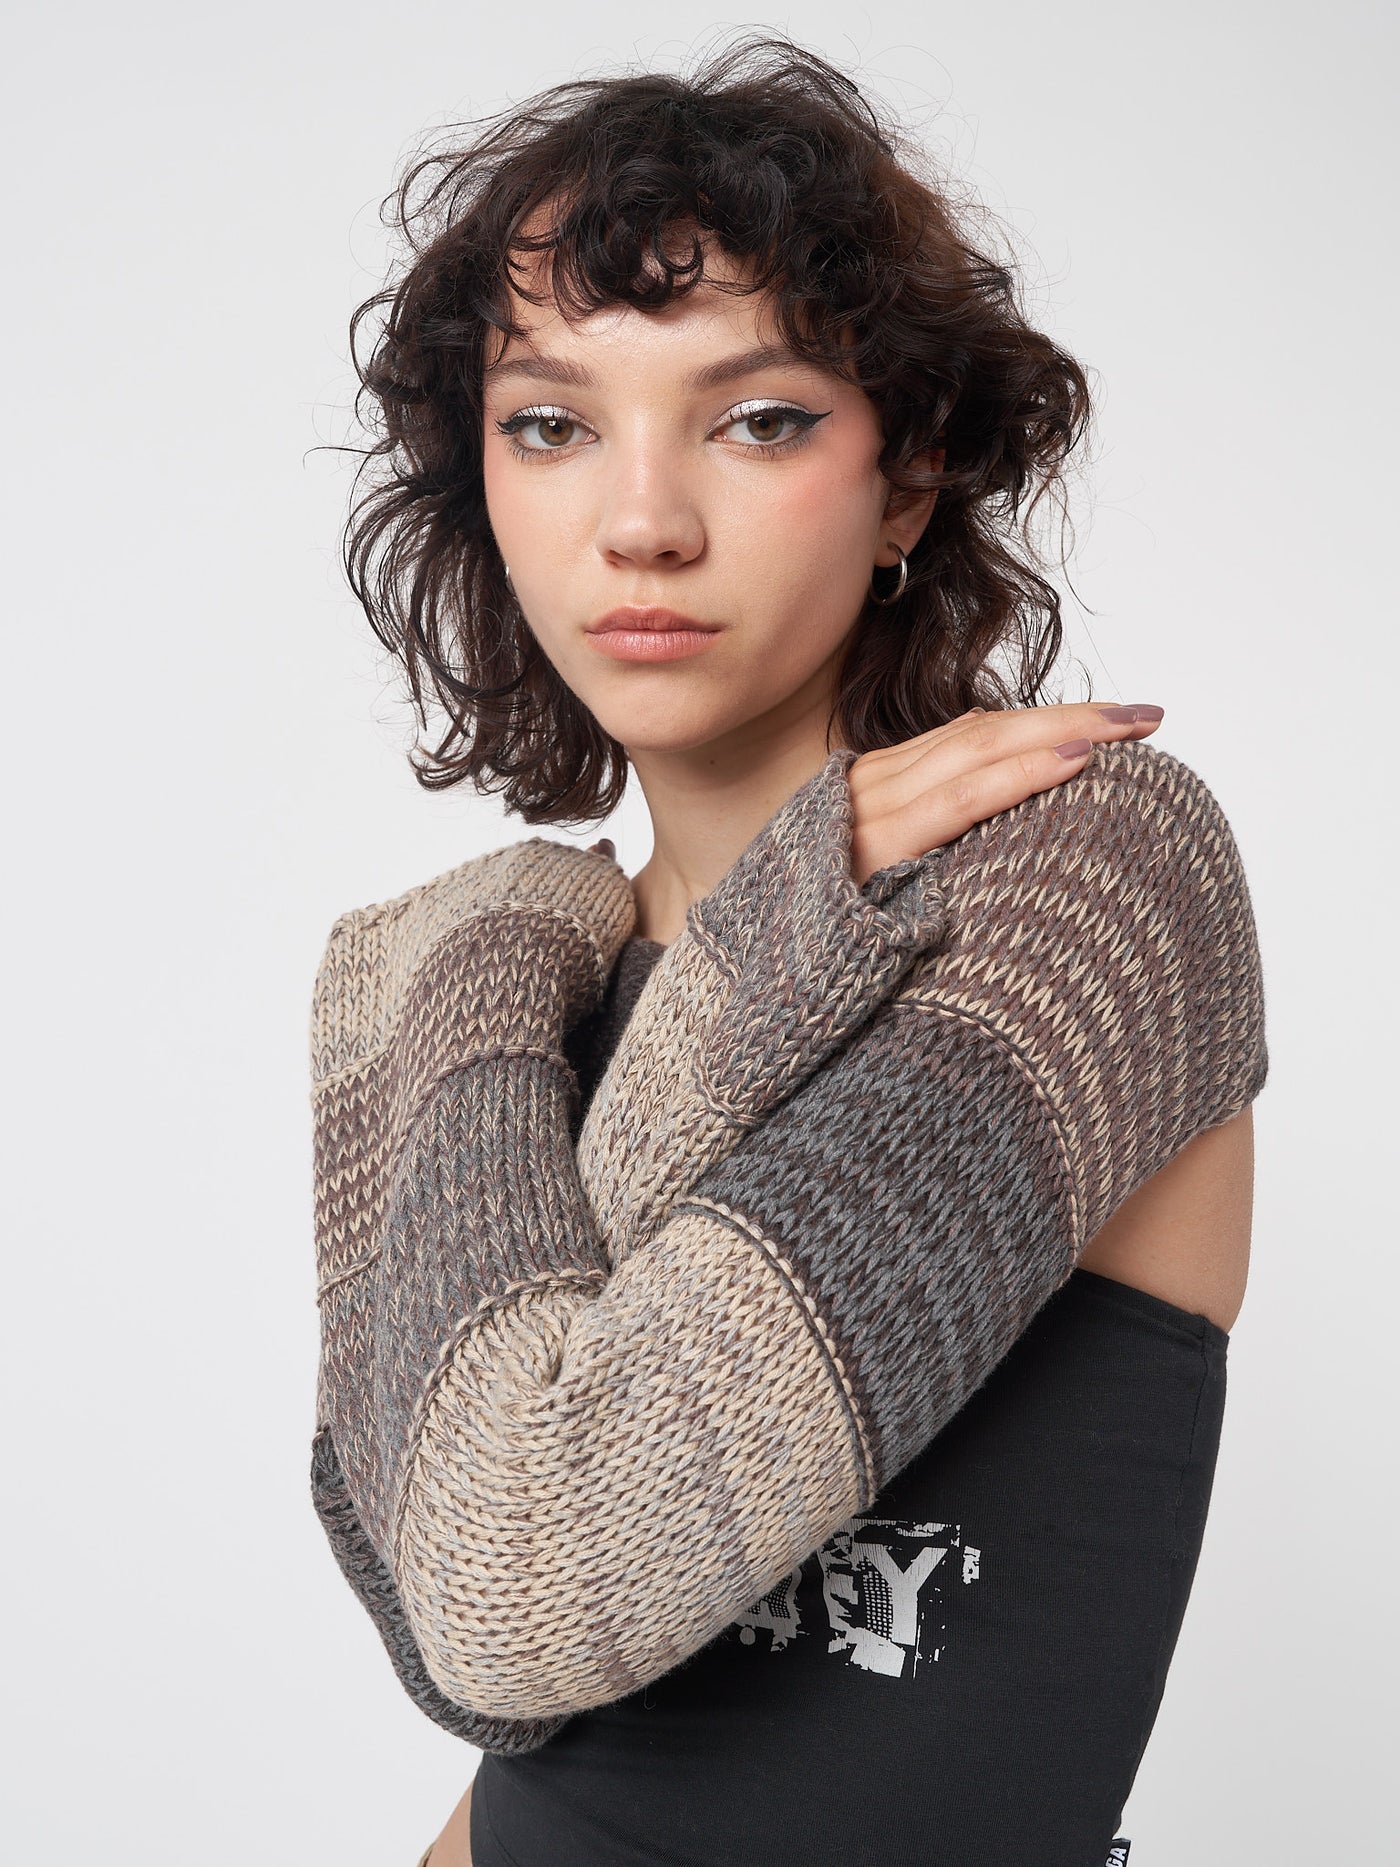 Bolero patchwork knitted shrug top in brown tones